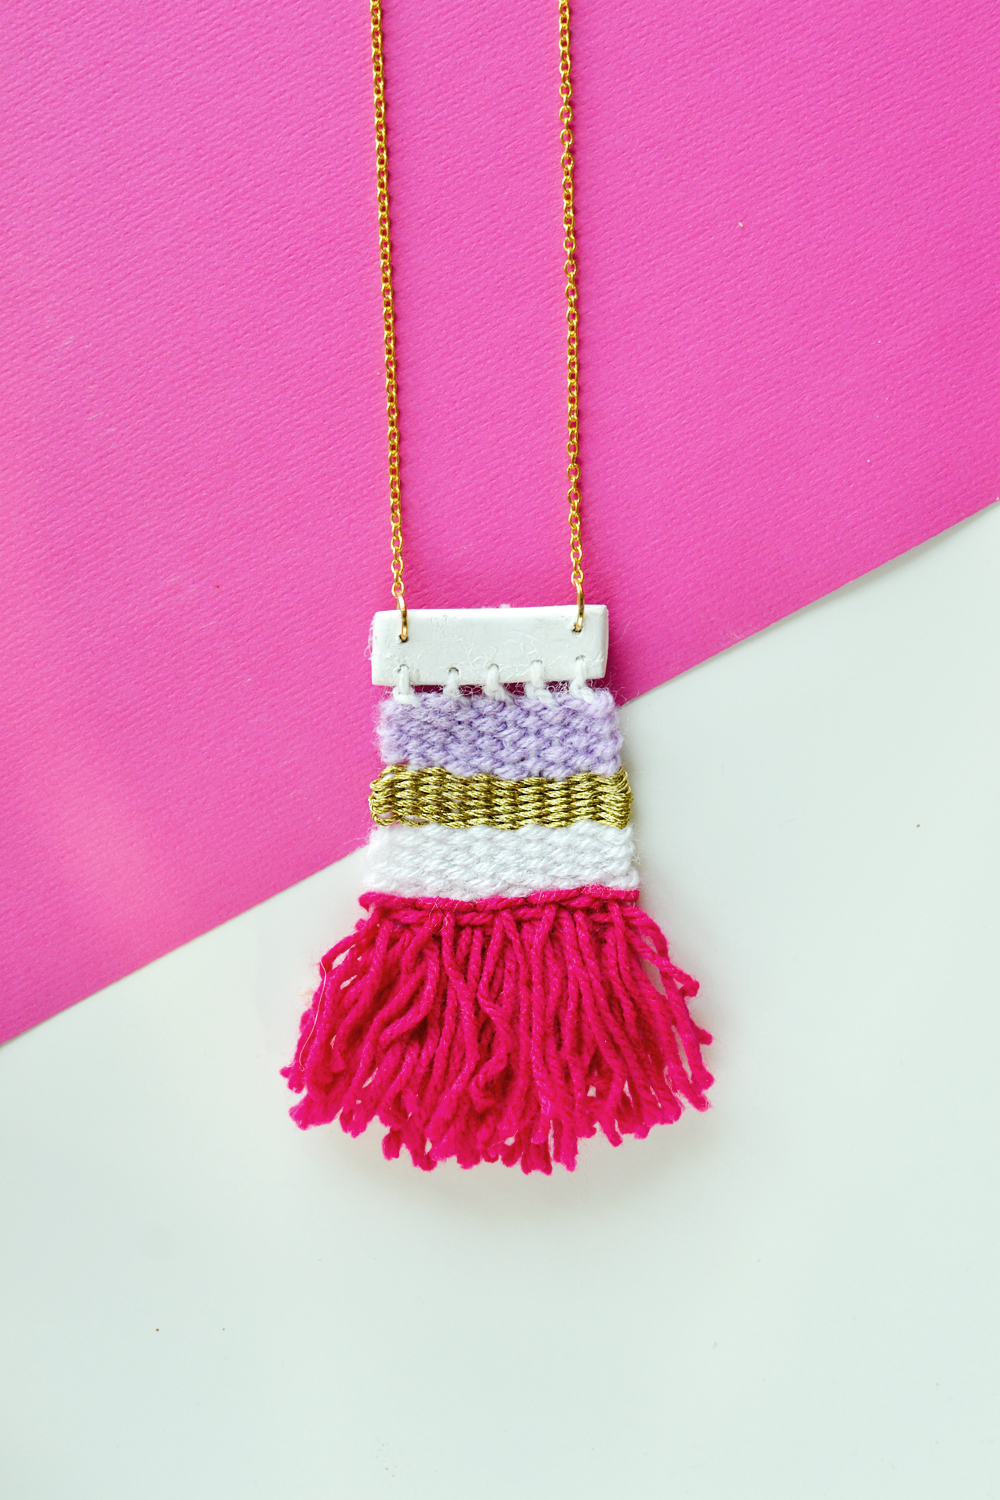 Woven necklace